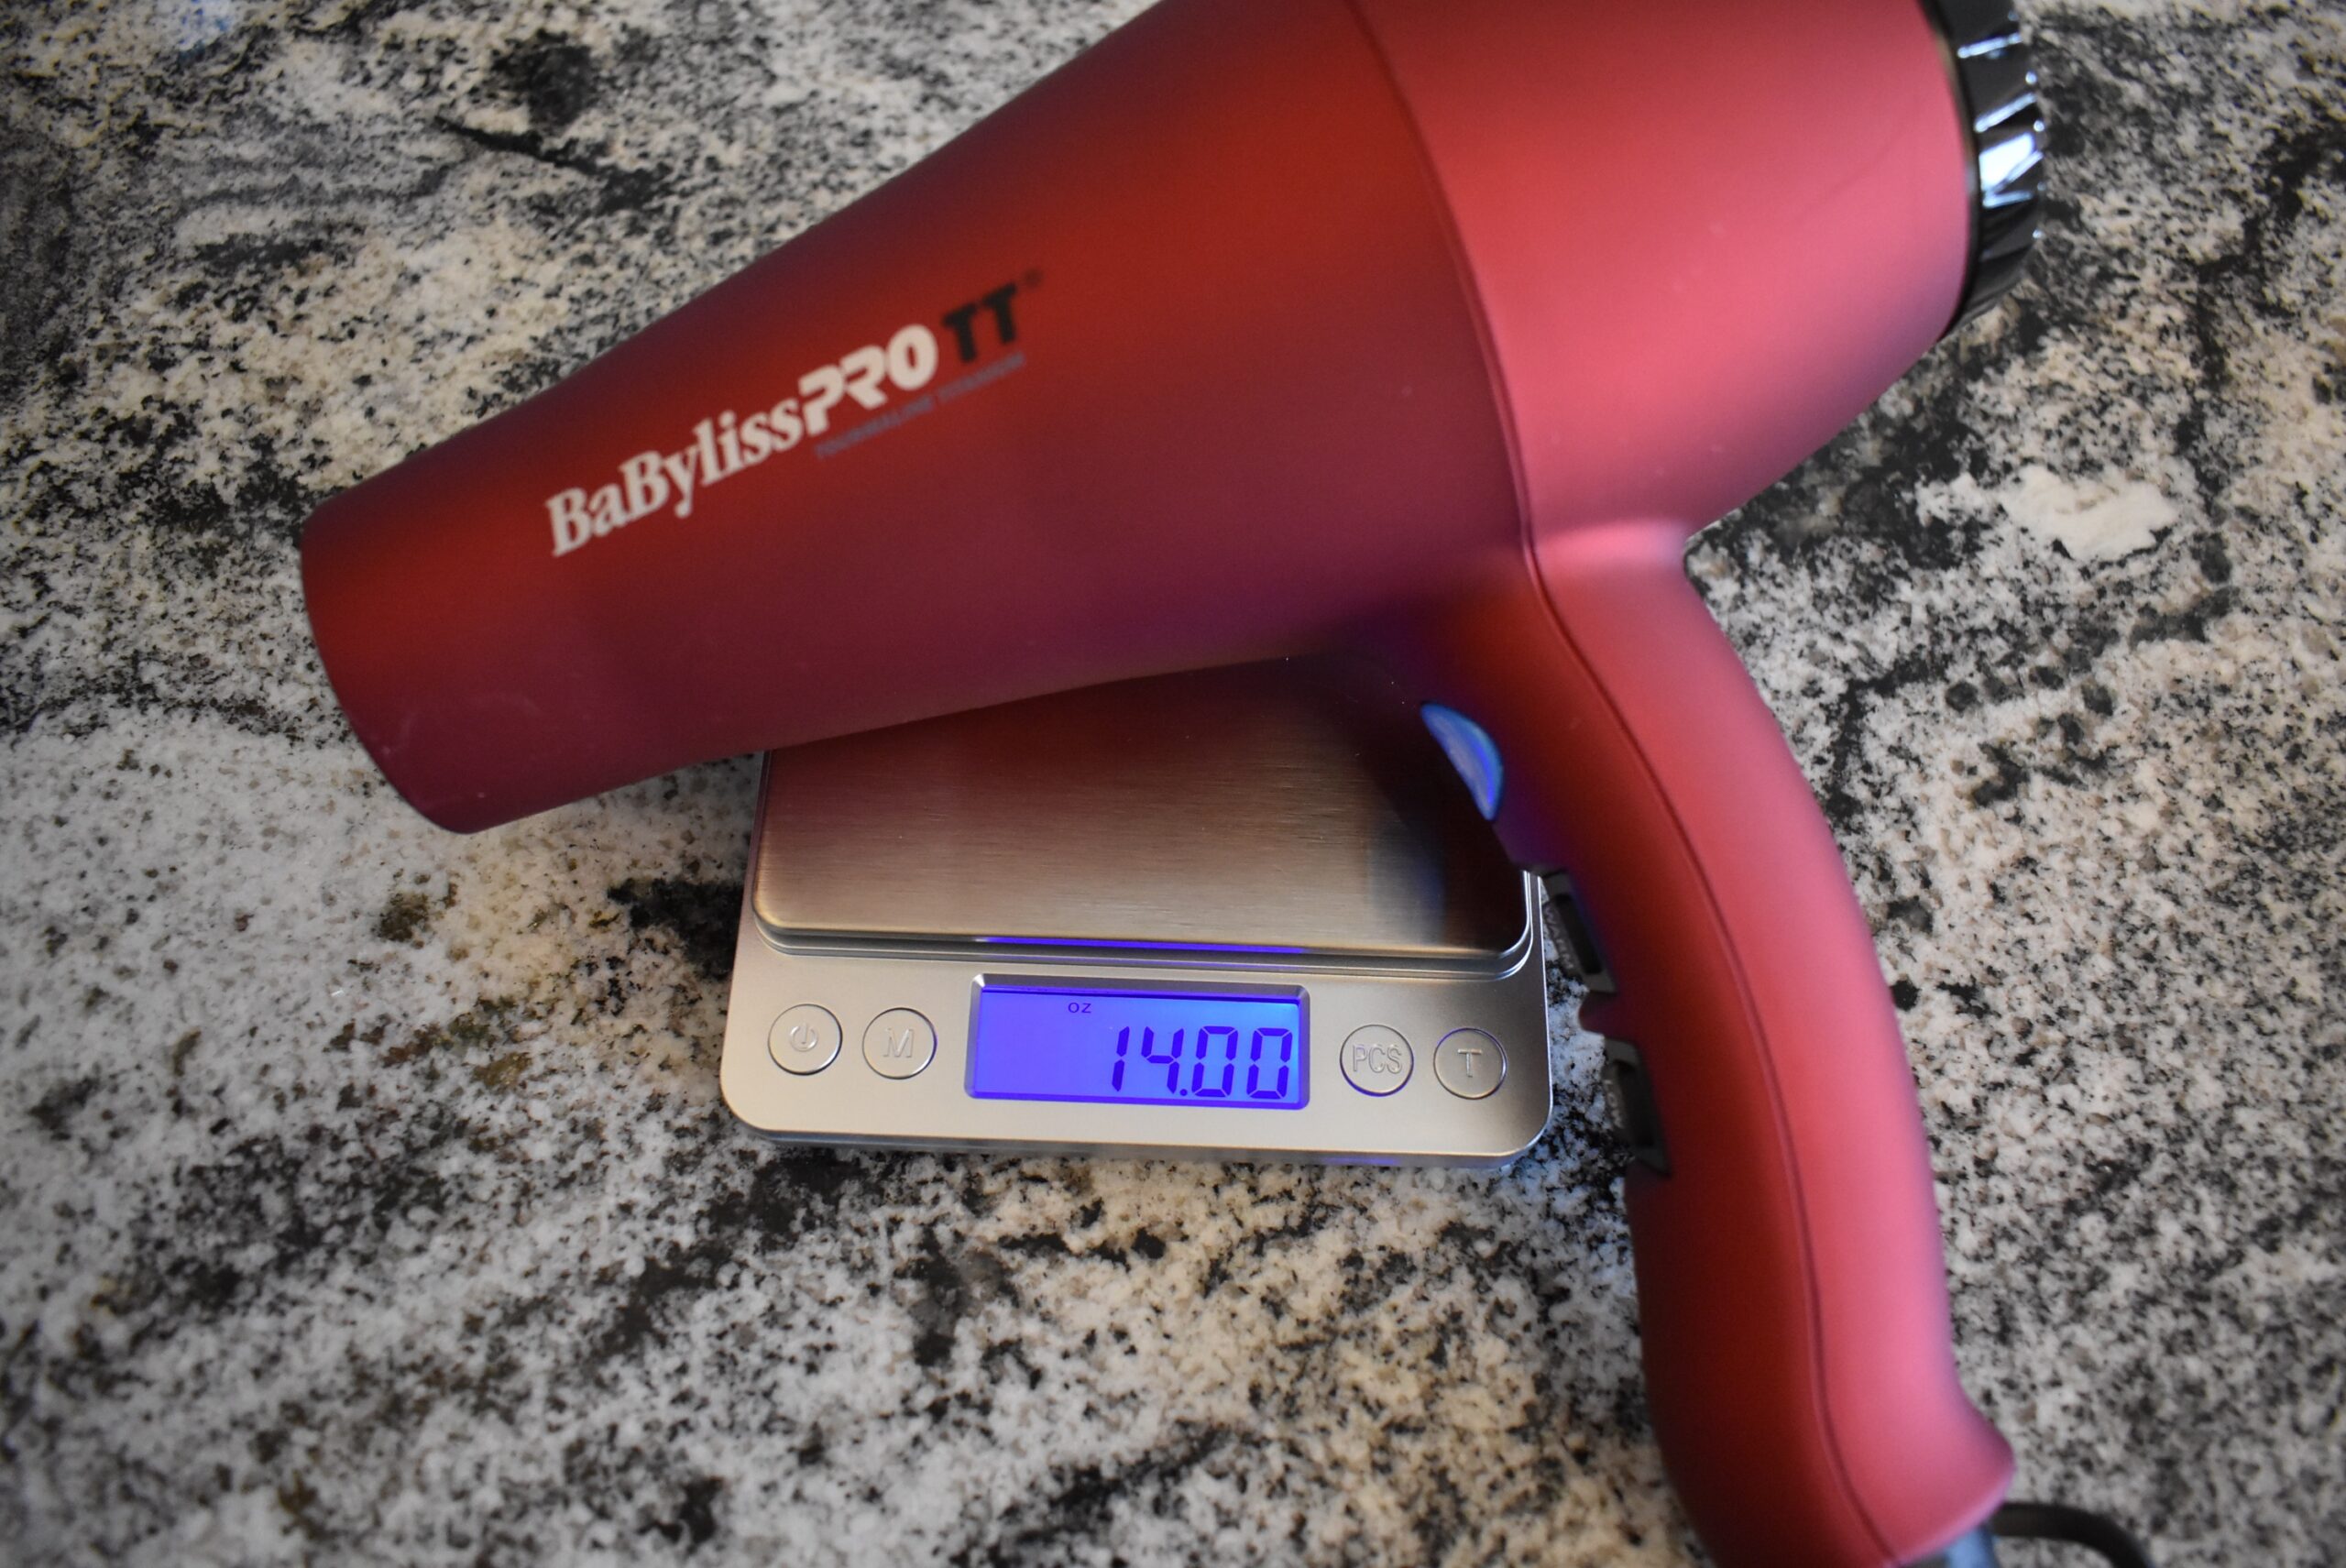 At 14 oz, this is one of the lightest hair dryers on our best hair dryer list